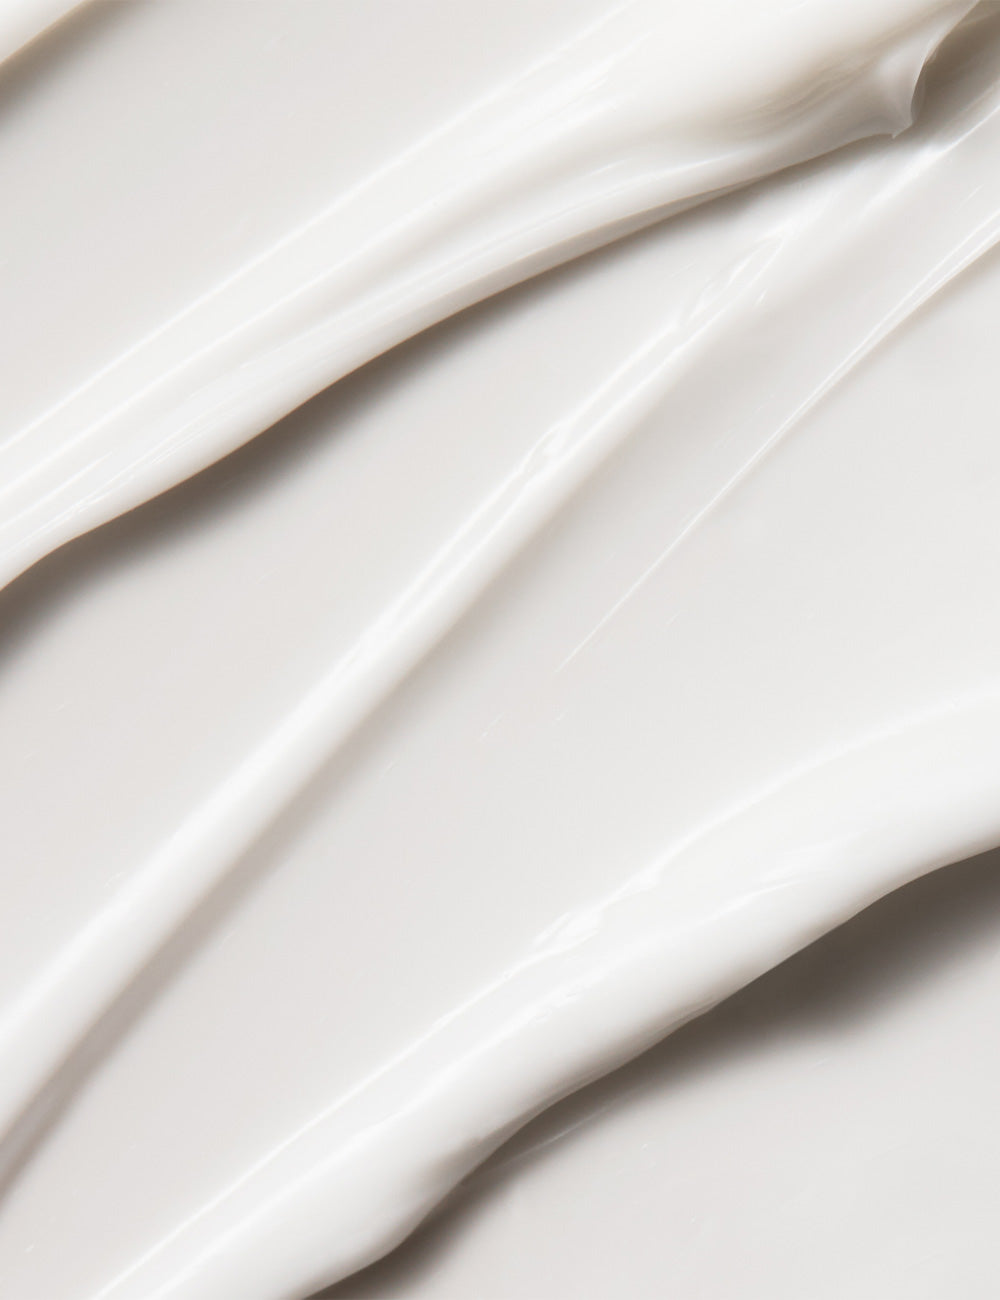 Close-up photo of a moisturizer being swirled or applied, with a creamy white texture, on a plain background.